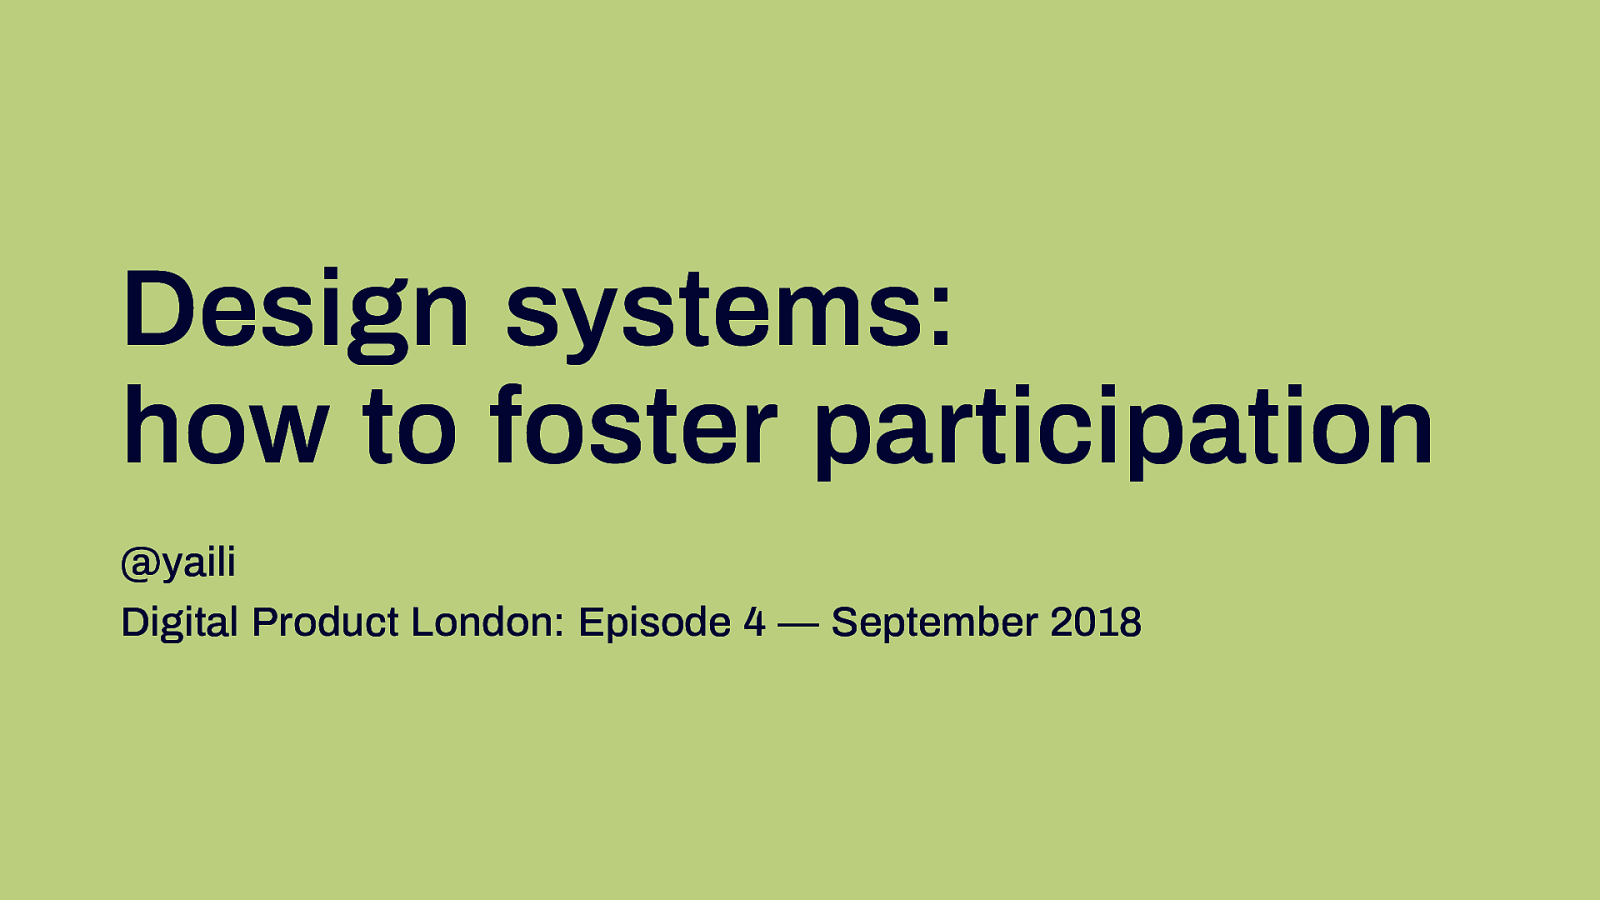 Design systems: how to foster participation